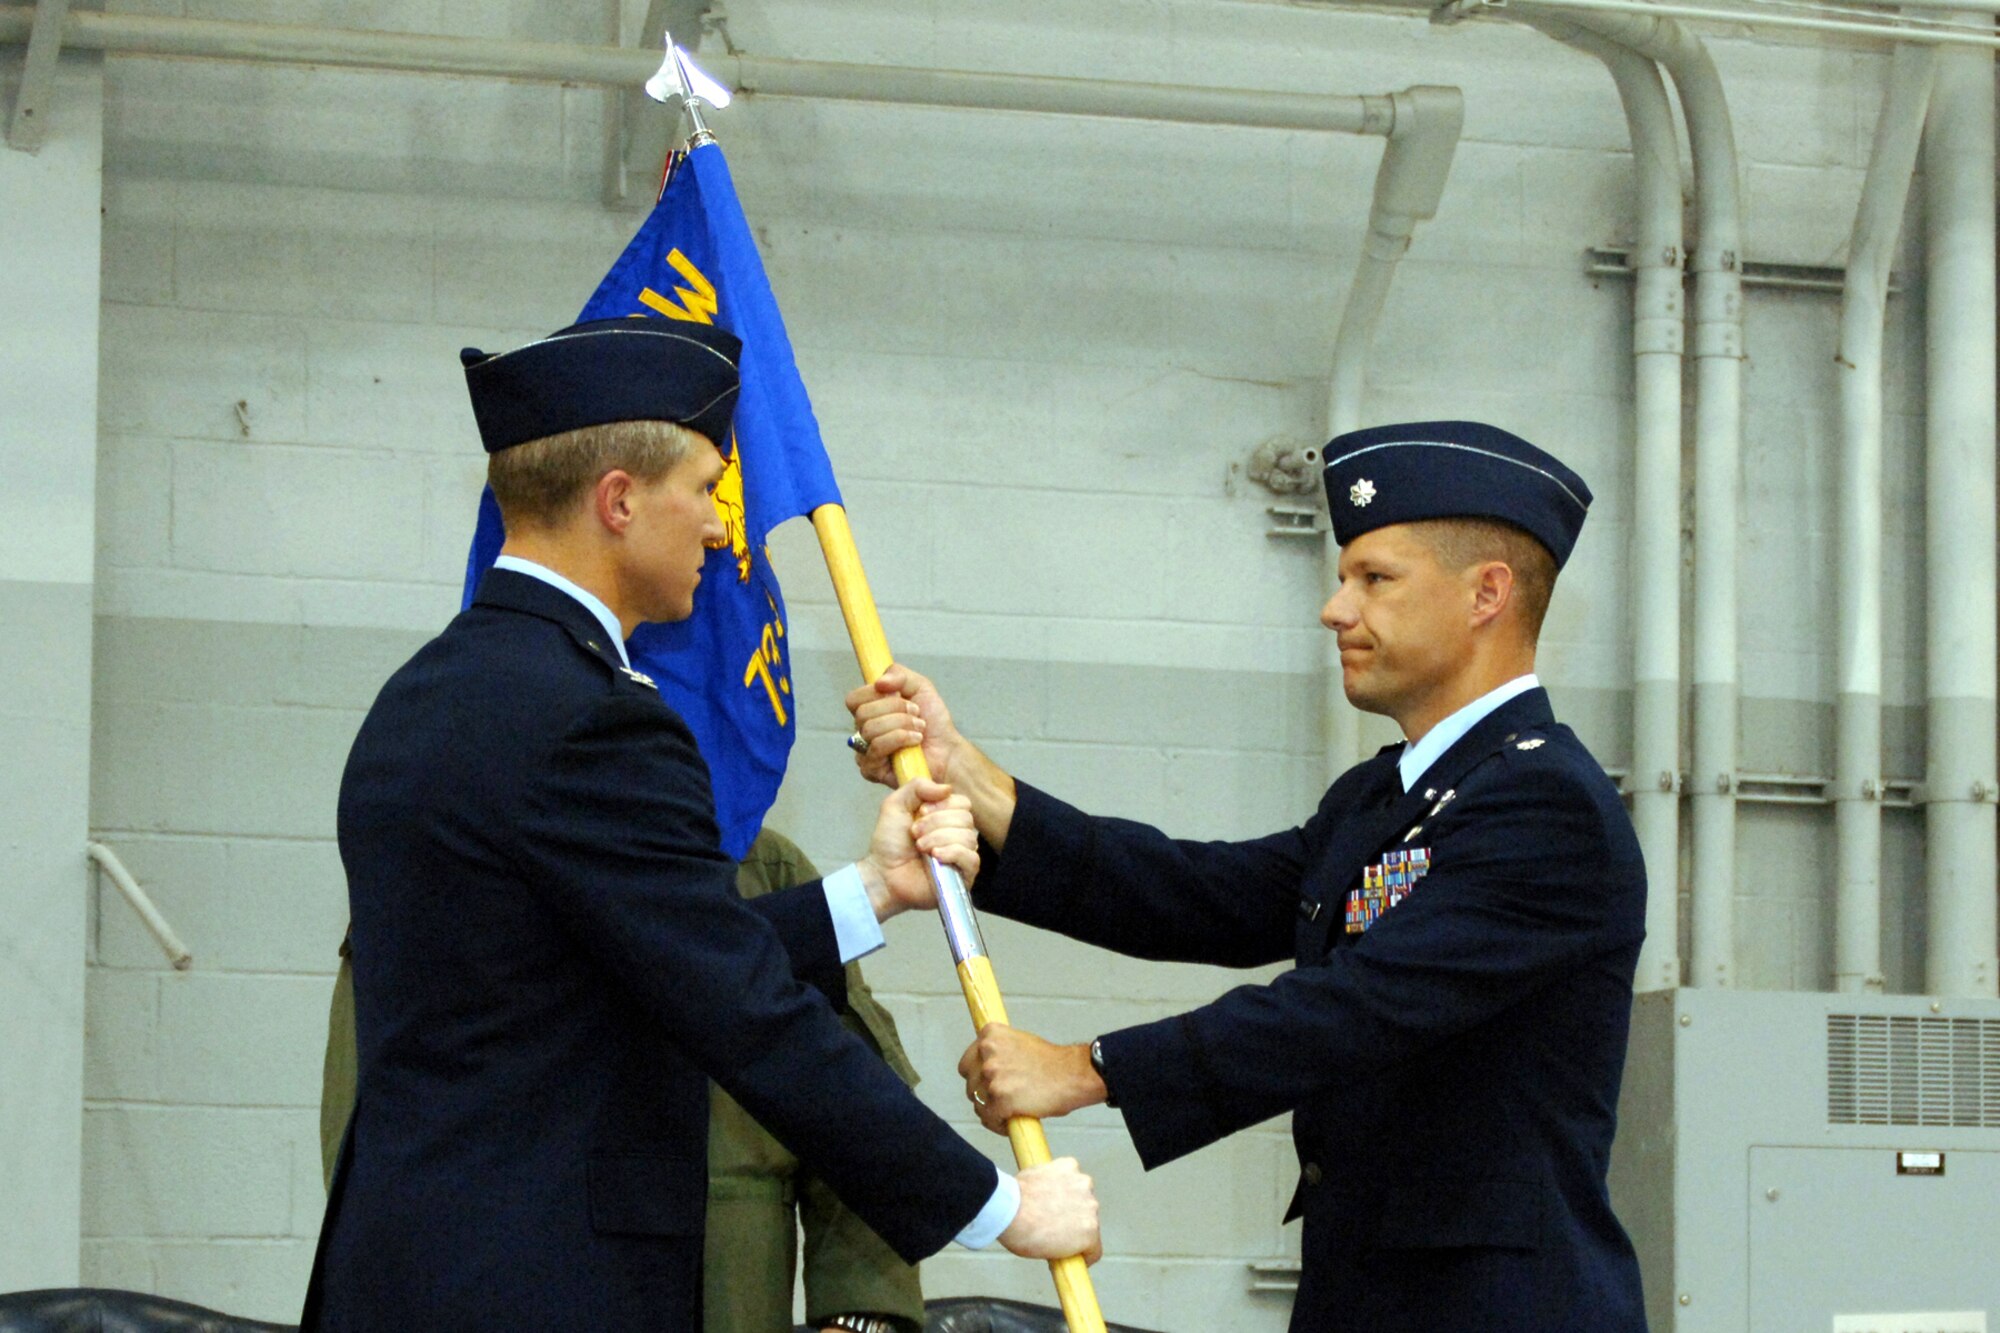 Col. Mark Alsid, 16th Operations Group commander, passes Lt. Col. Tom Markland, 73rd Special Operations Squadron commander, the guidon during the stand-up ceremony Tuesday in Commando Hangar. (U.S. Air Force Photograph by Airman 1st Class Stephanie Sinclair)